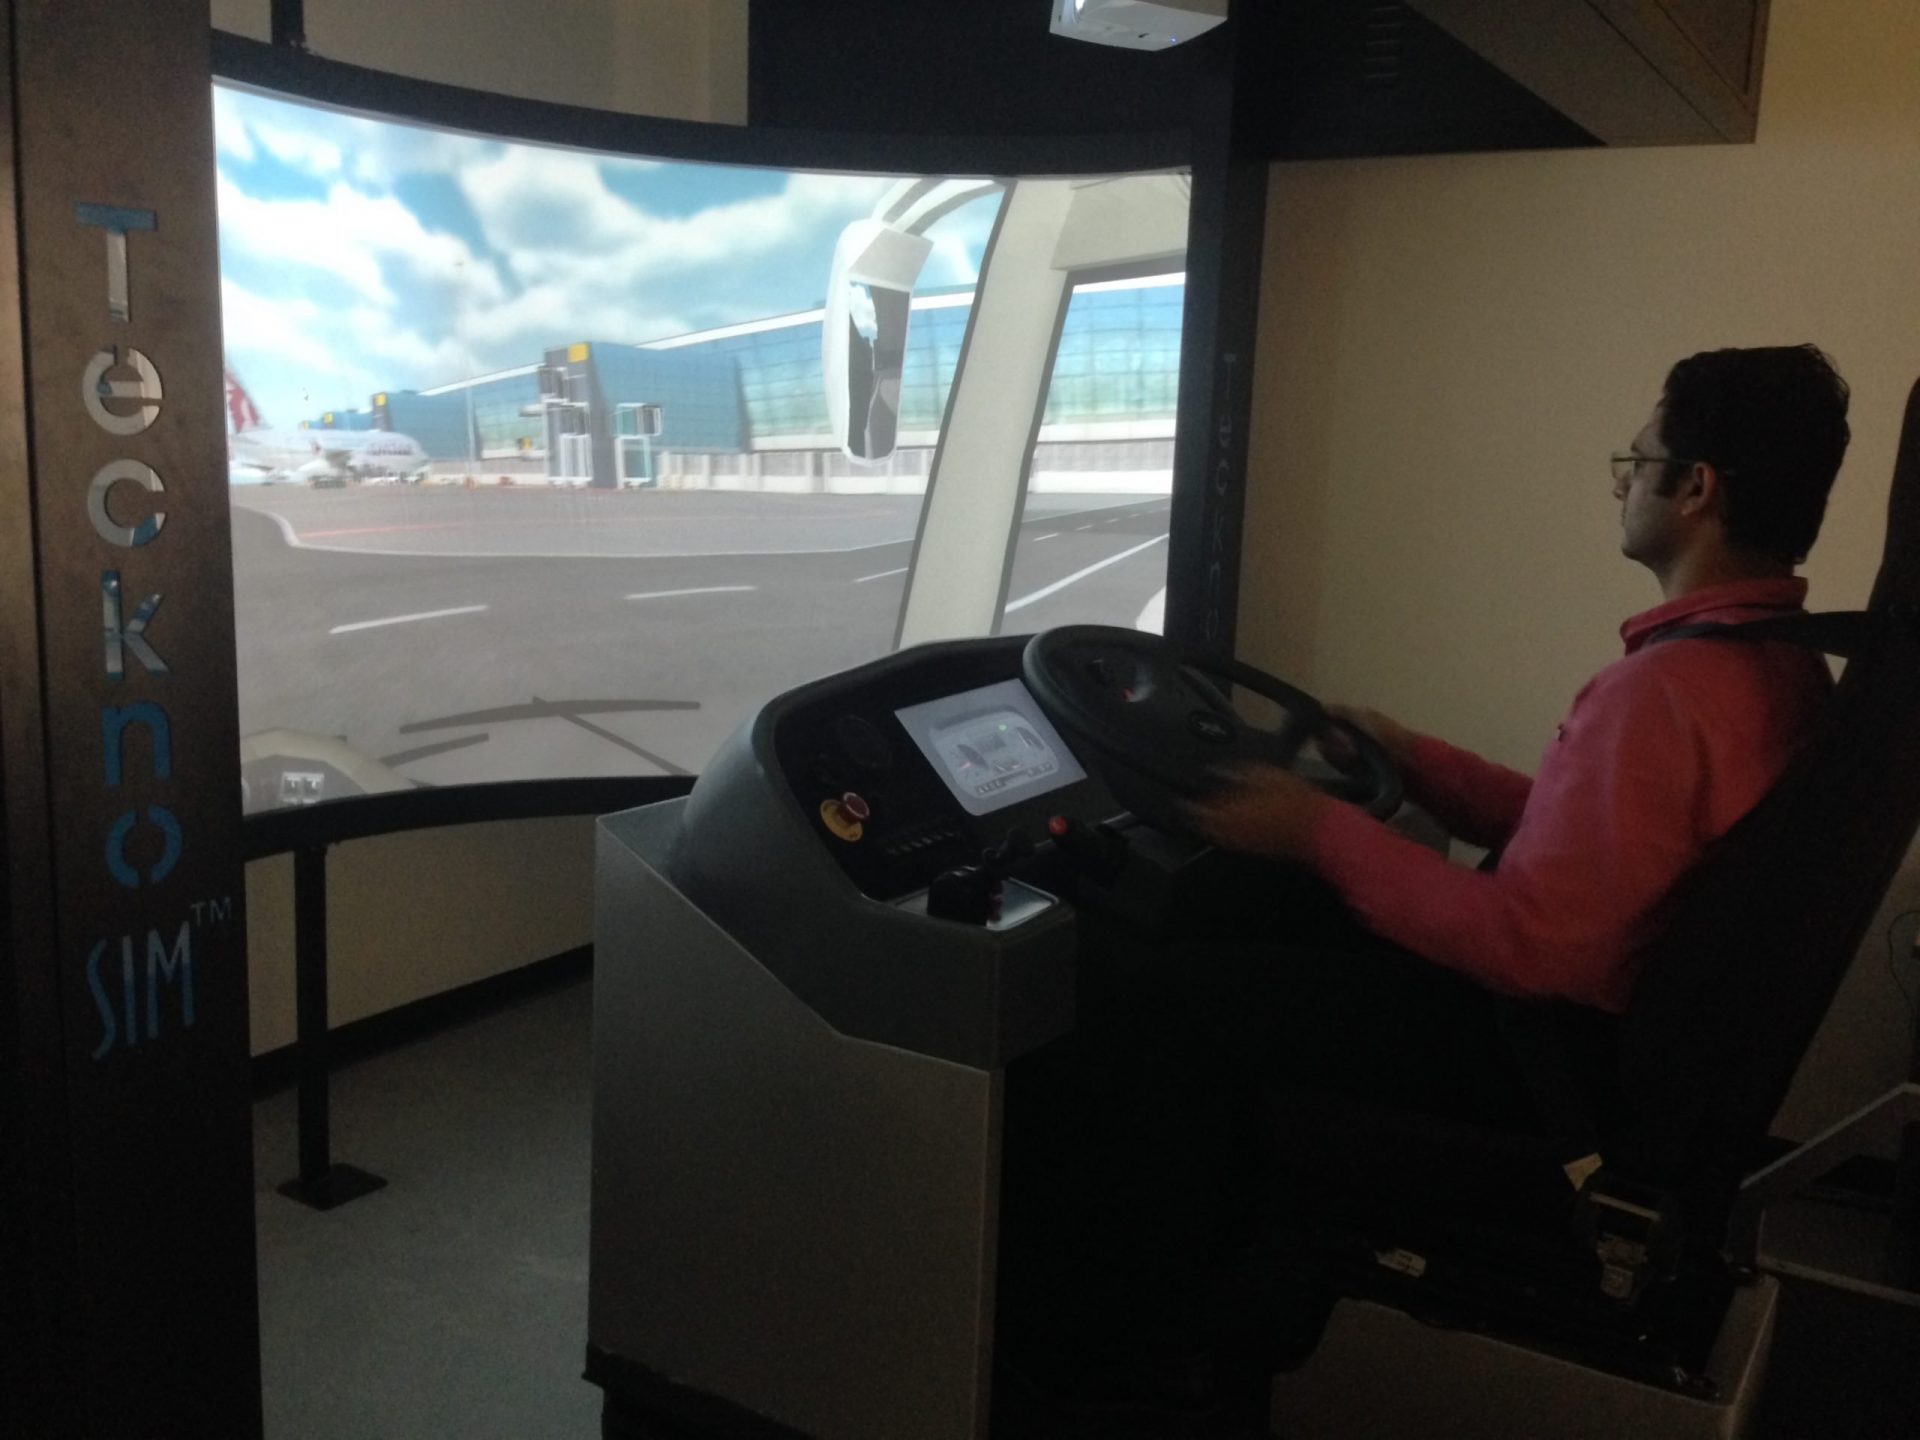 Virtual Vehicle invests in full-featured driving simulator